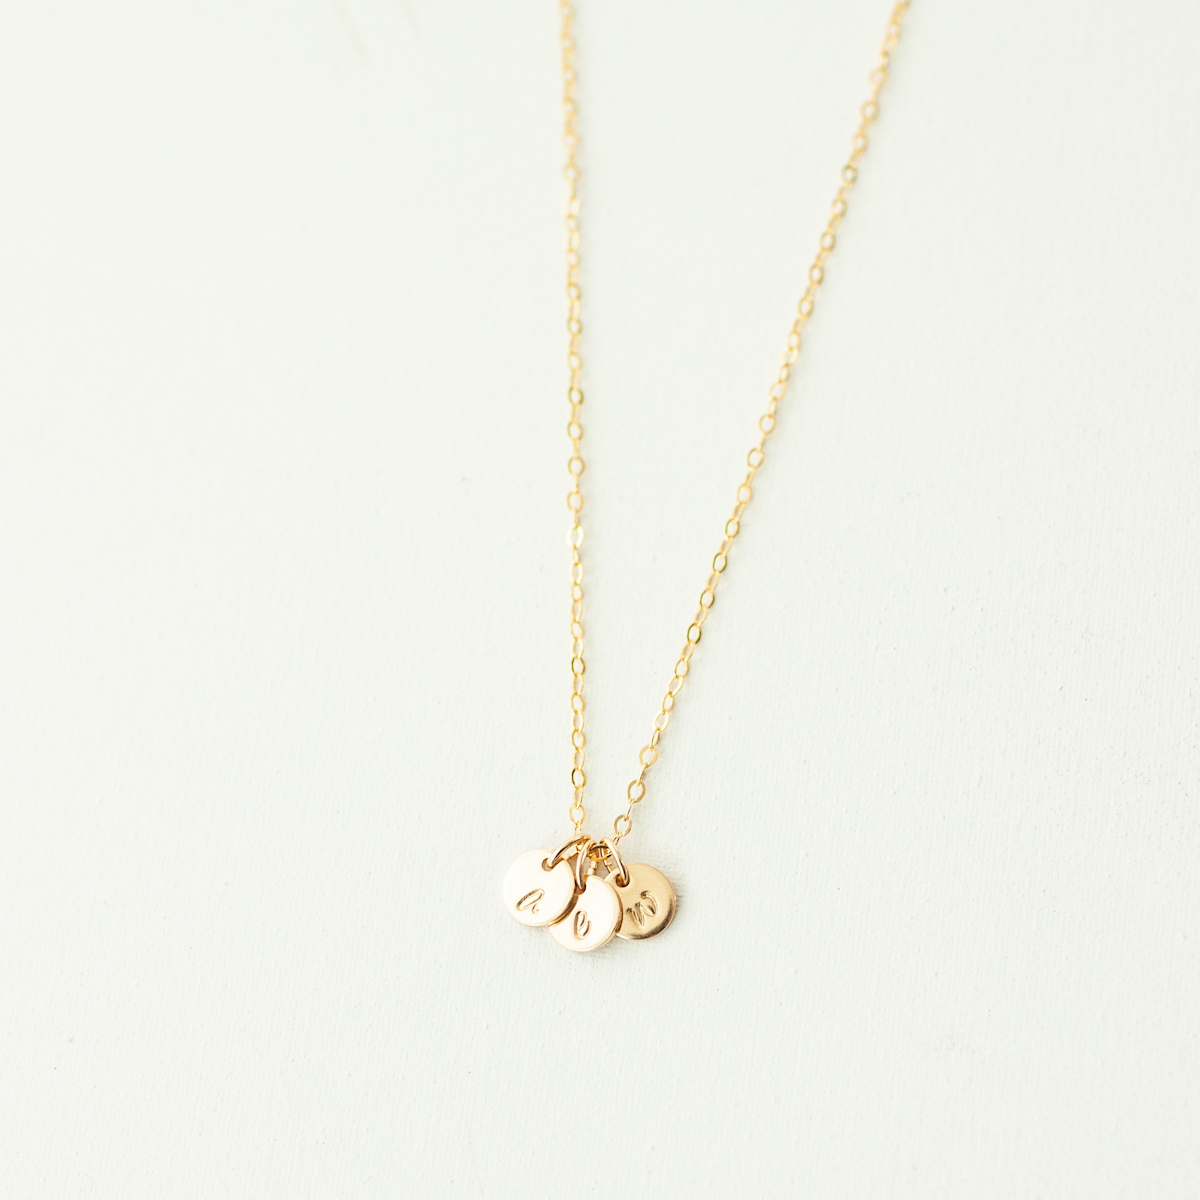 9ct Gold Mini Disc Initial Birthstone Necklace | Posh Totty Designs